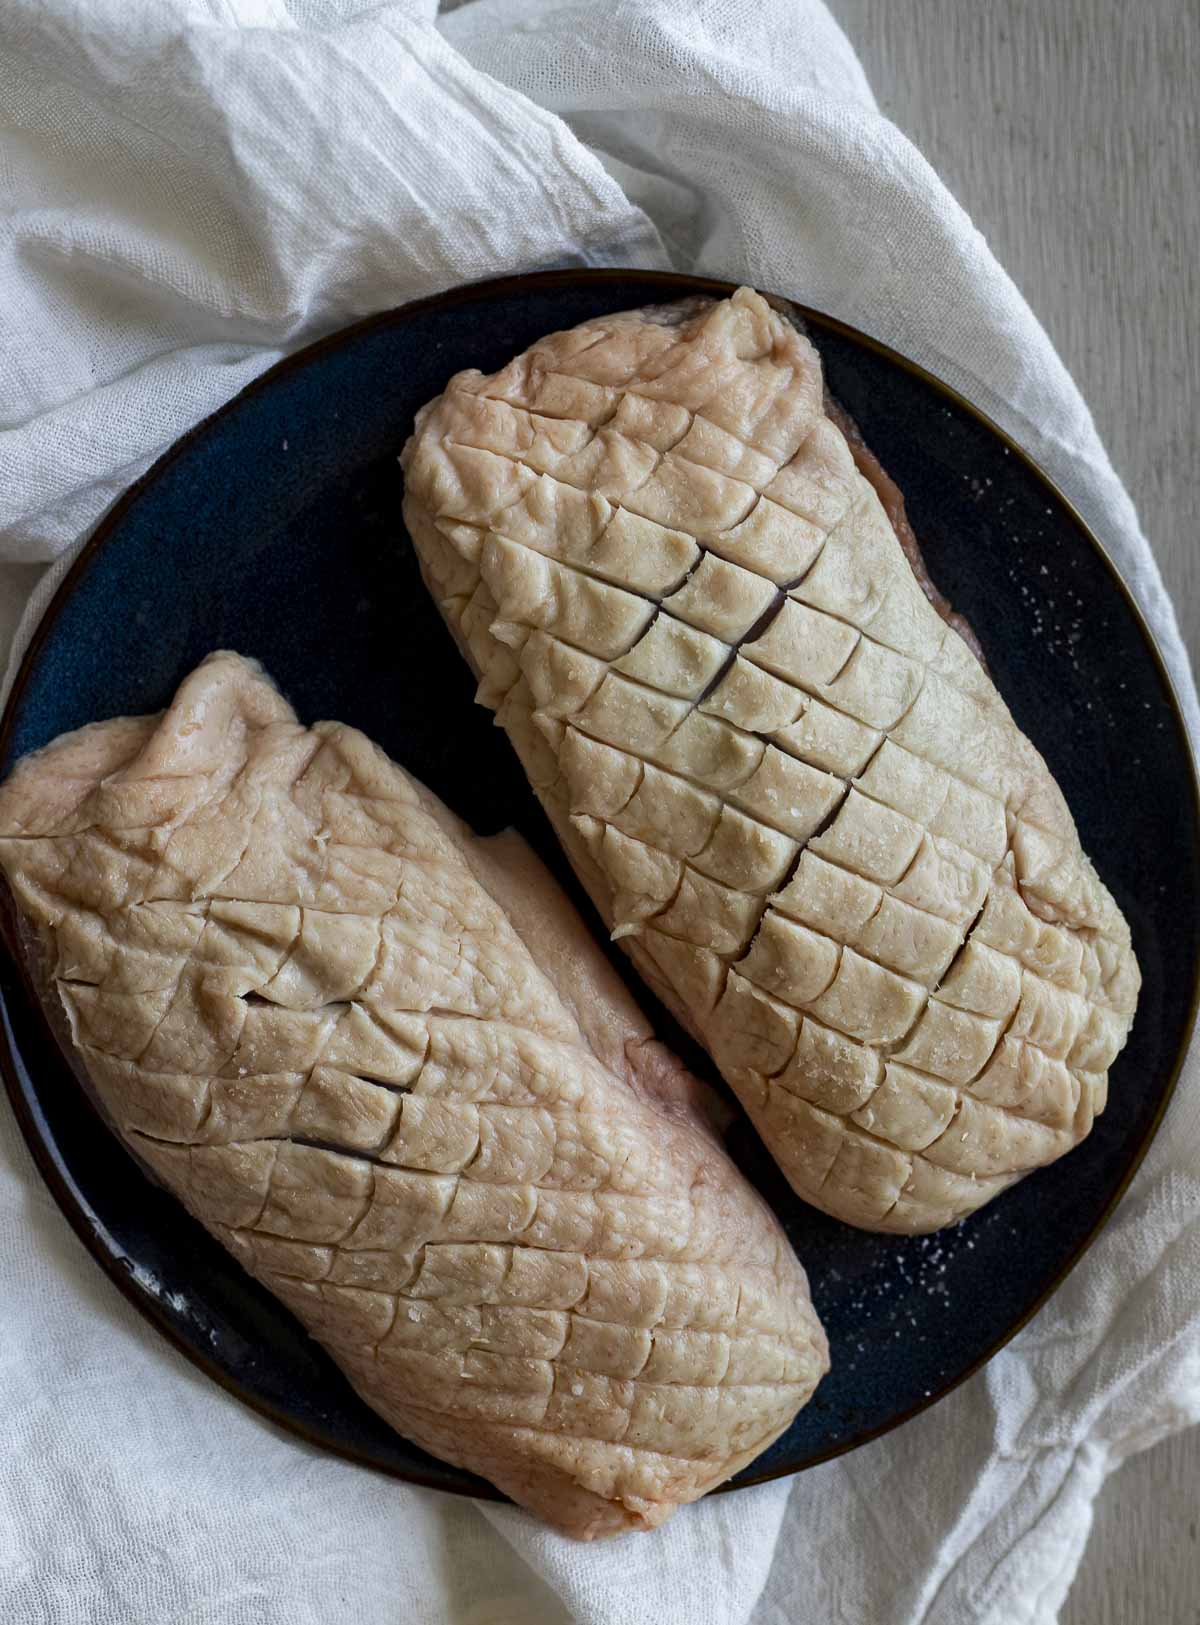 Duck breasts with their skin scored.